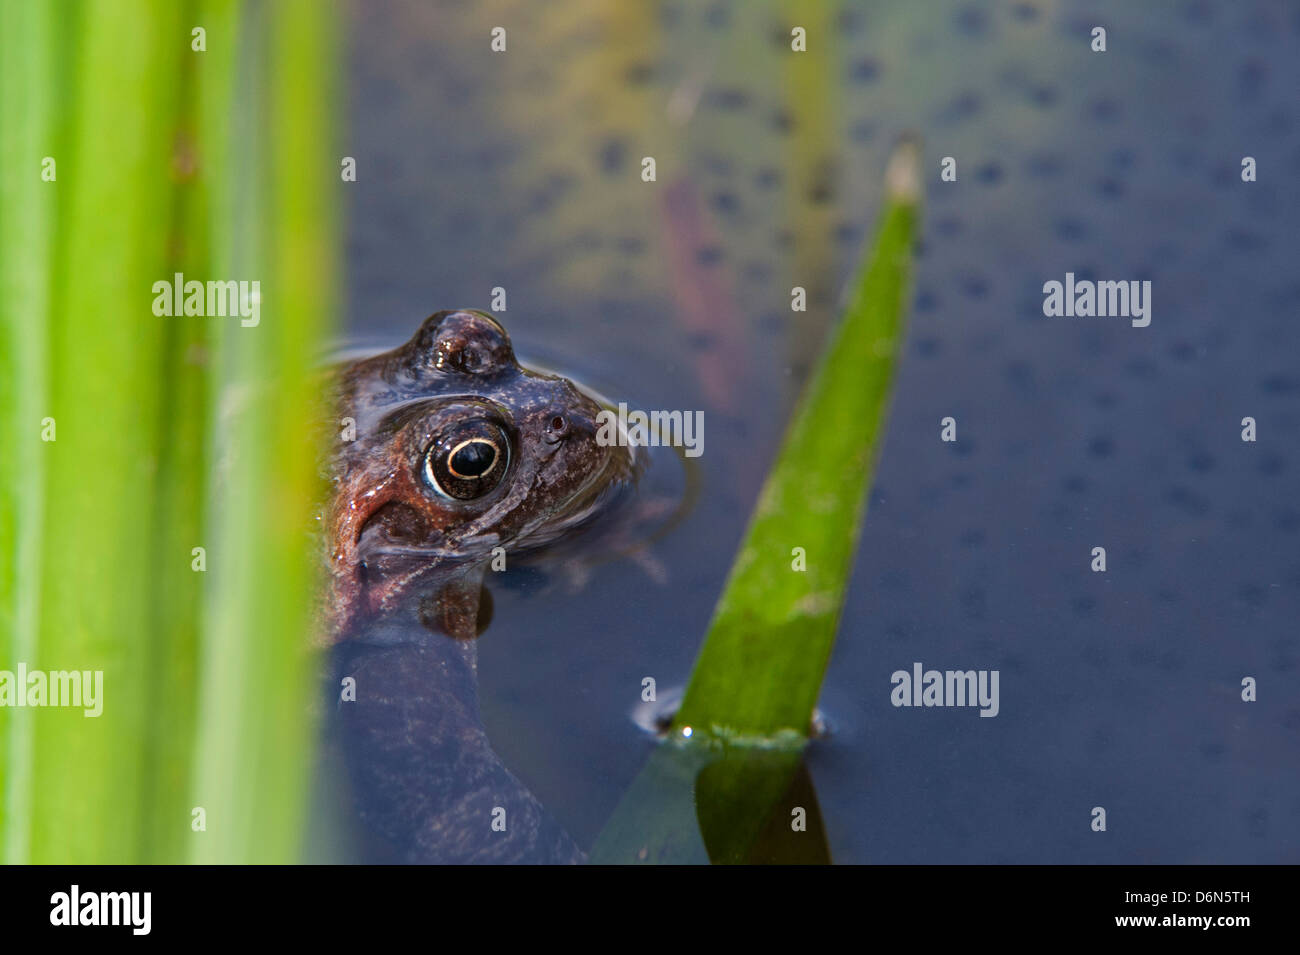 European common brown frog (Rana temporaria) floating among frogspawn in pond in spring Stock Photo